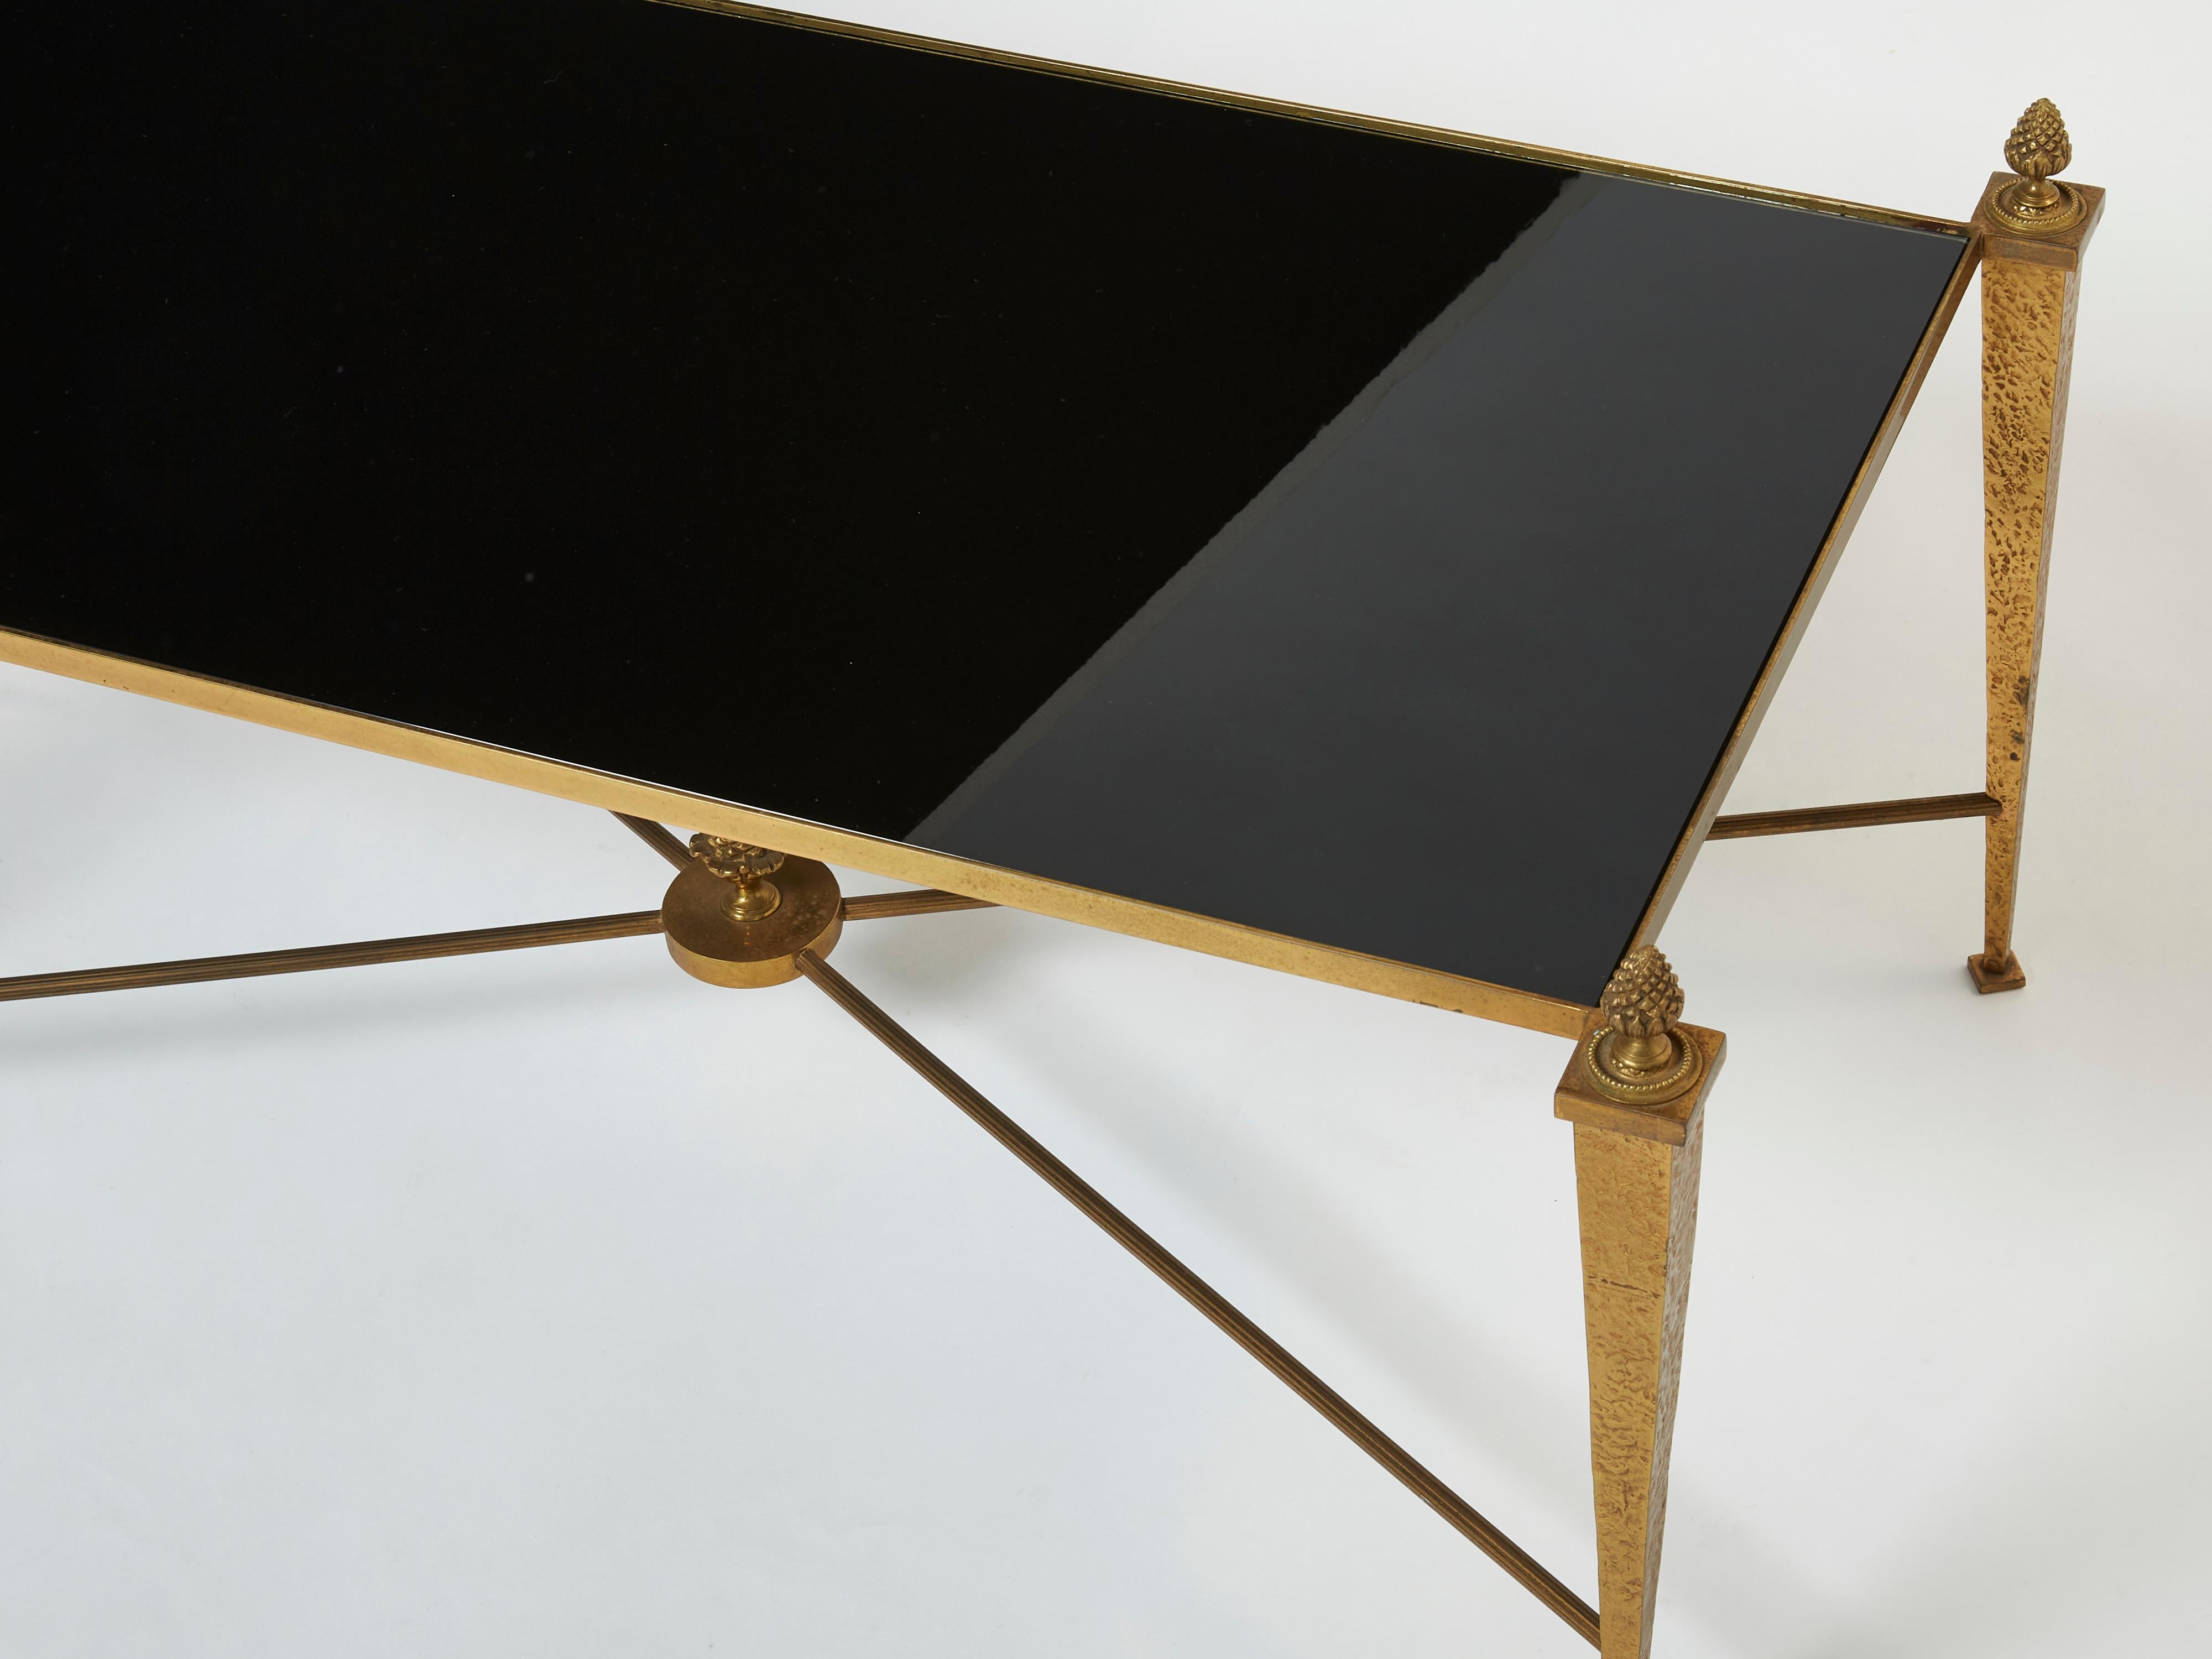 French Maison Ramsay Gilded Wrought Iron Opaline Coffee Table, 1960s For Sale 3